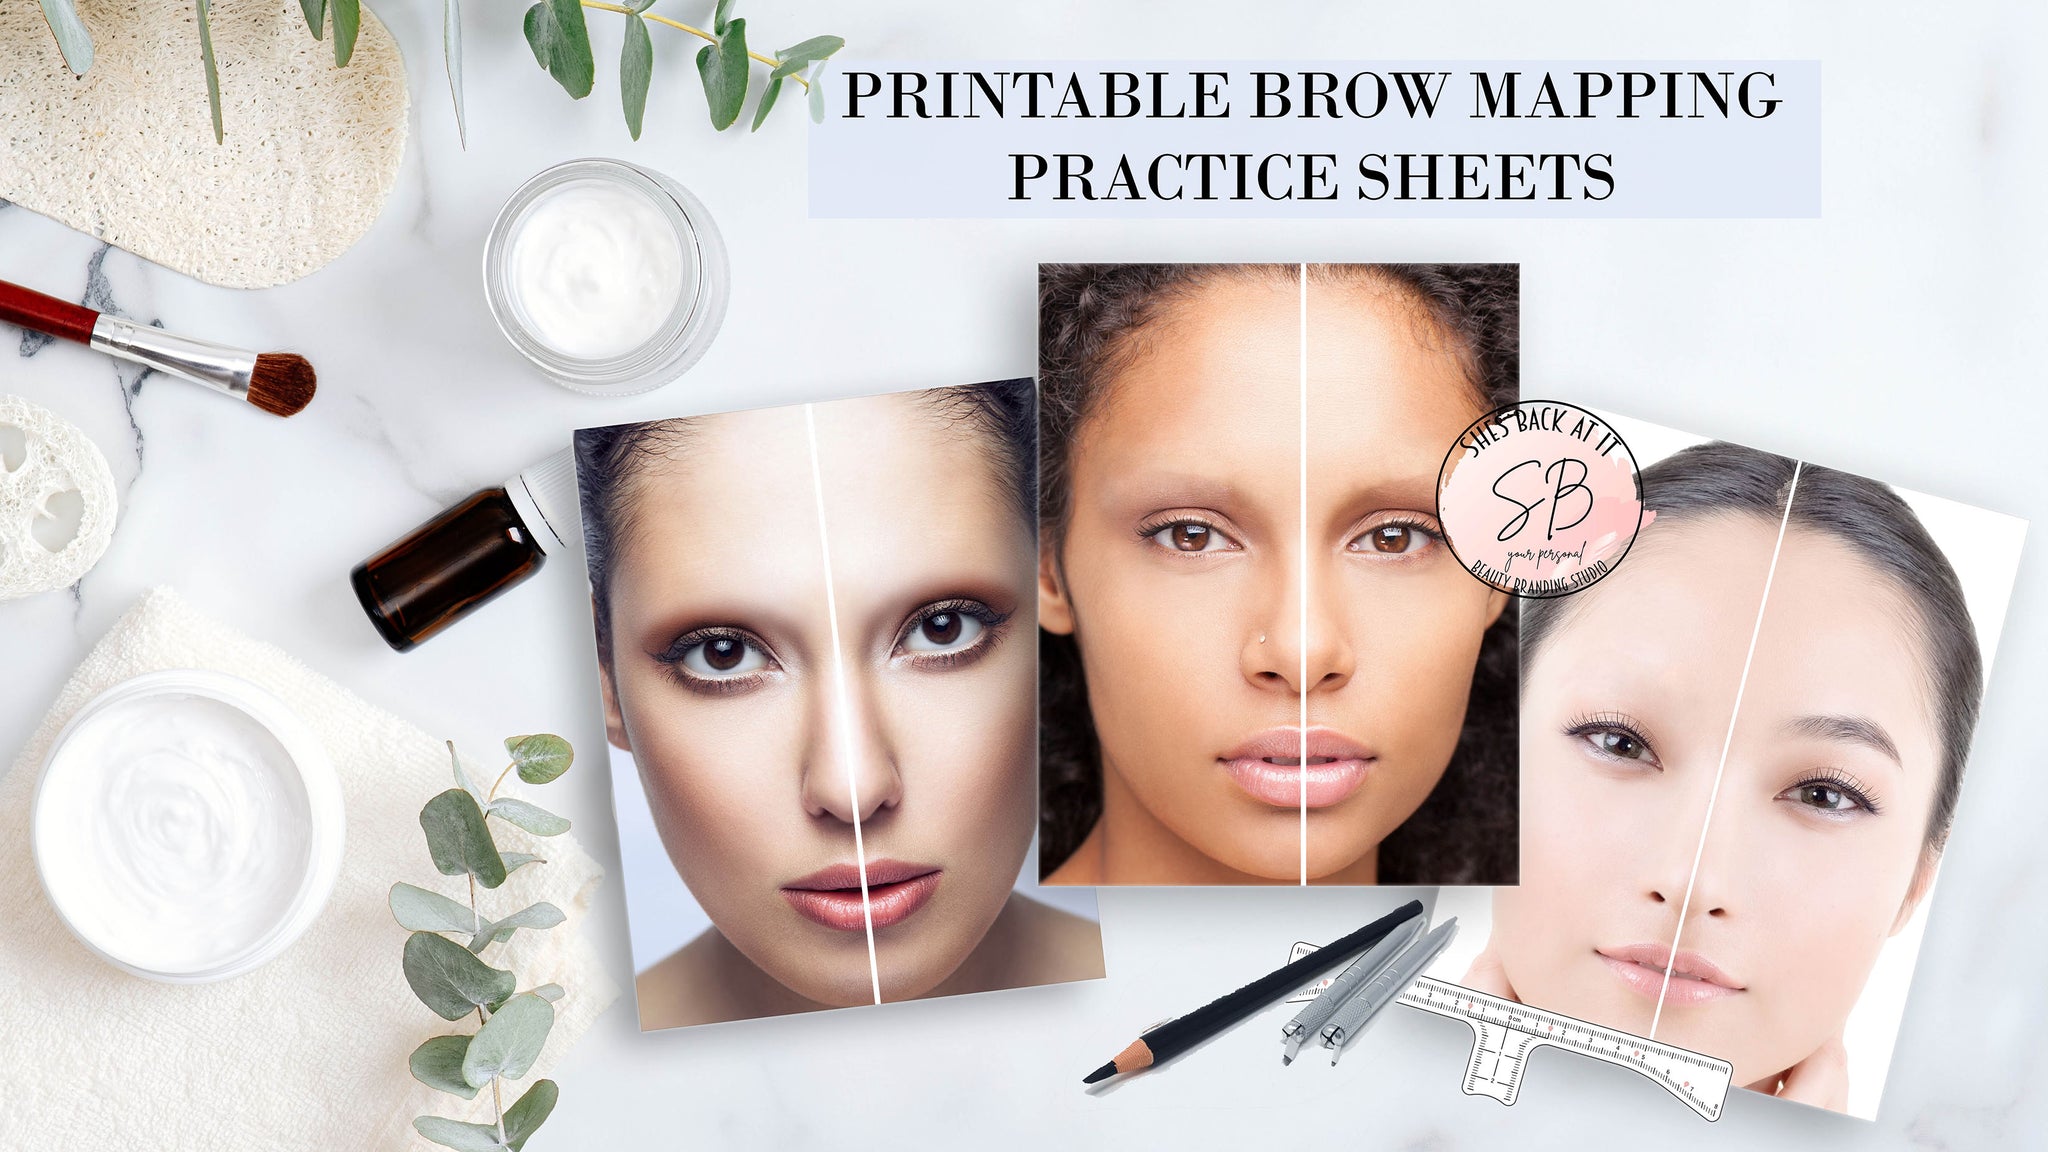 Eyebrow Shaping Practice Sheets